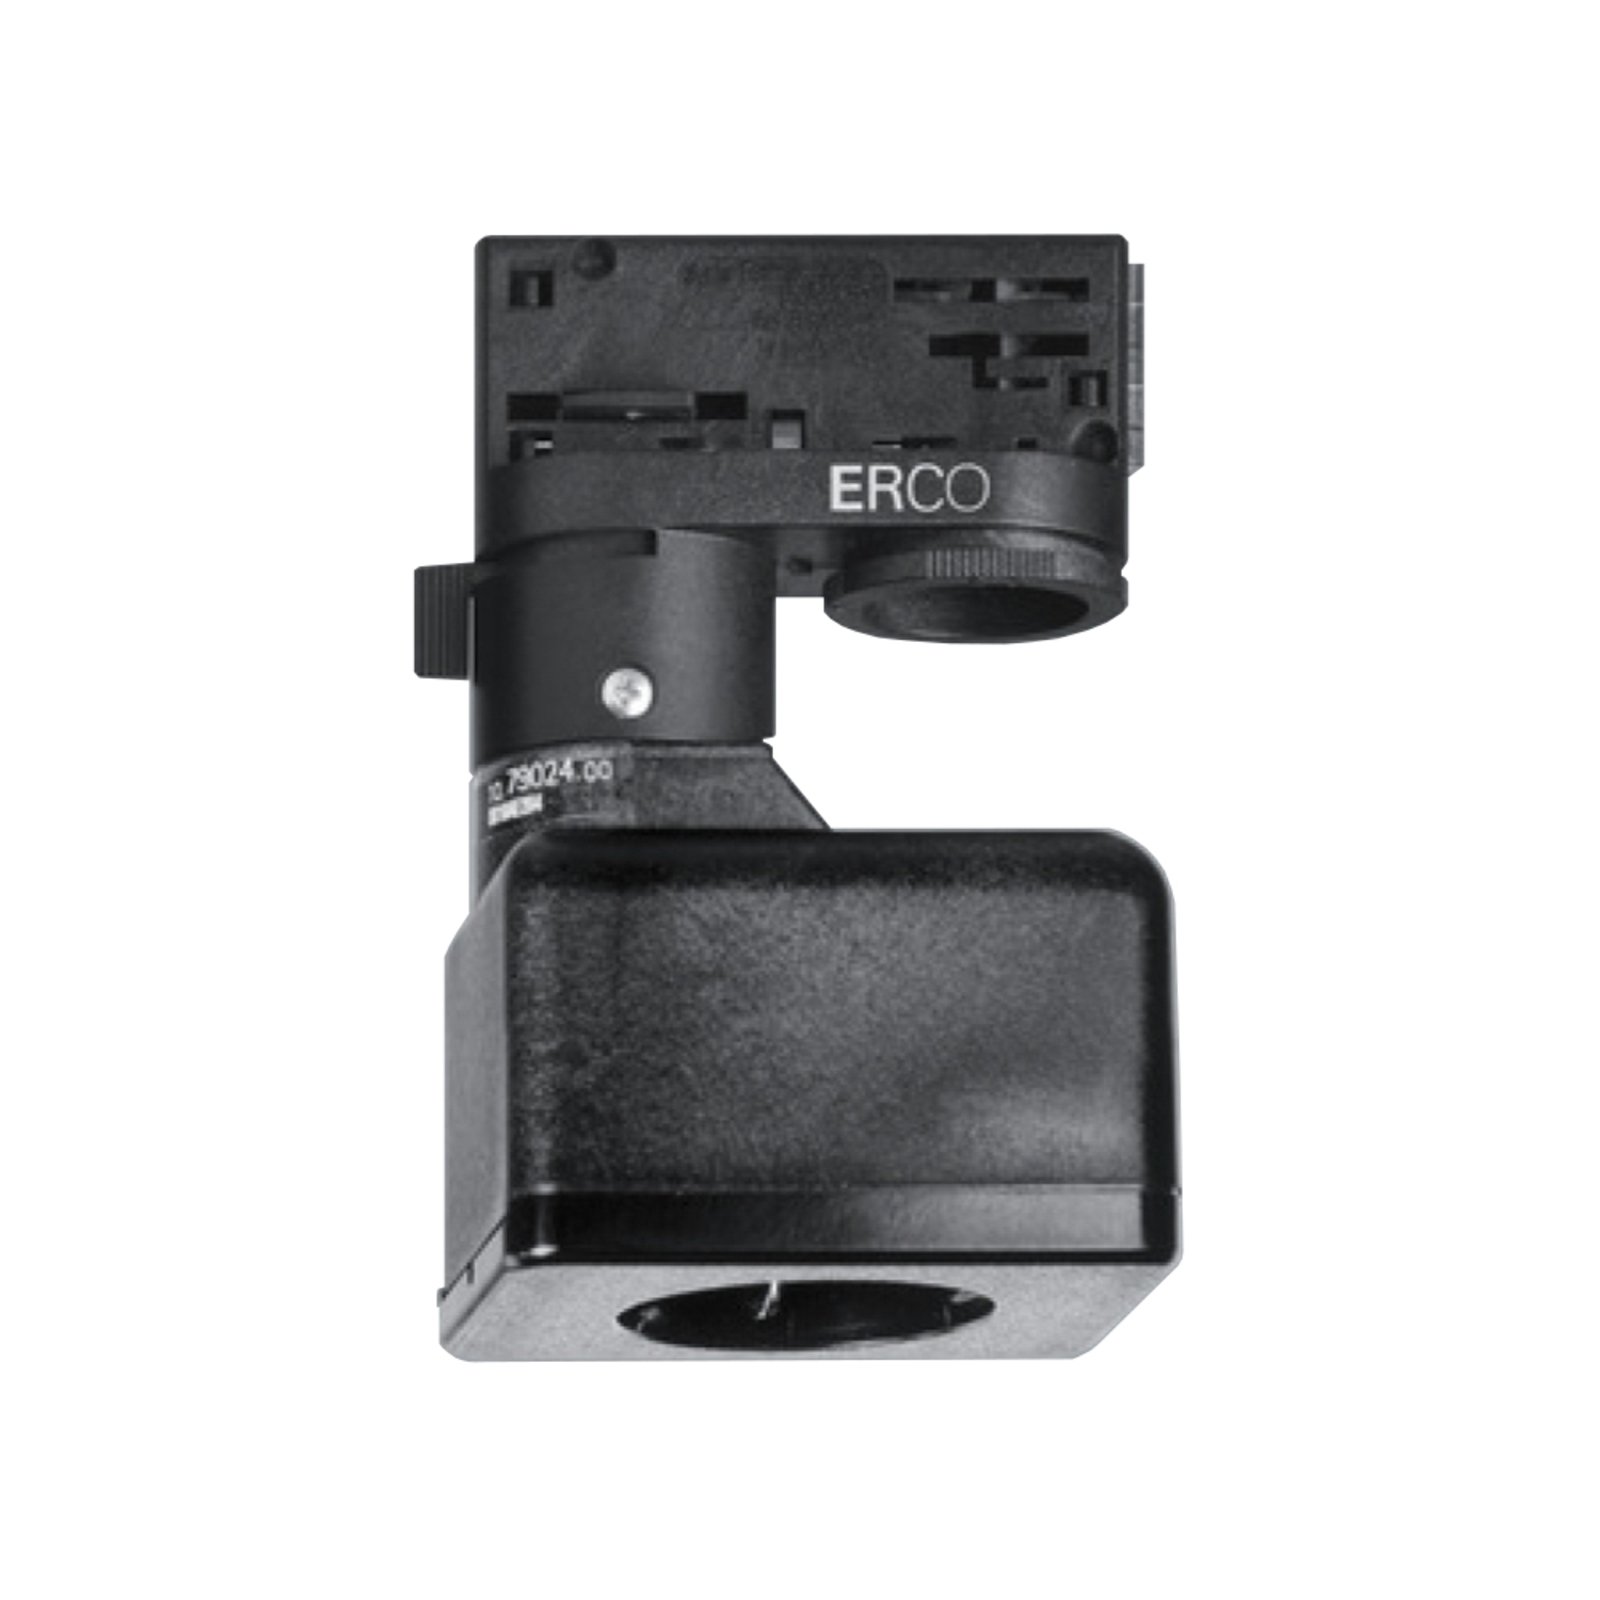 ERCO 3-circuit adapter with a Schuko socket, black